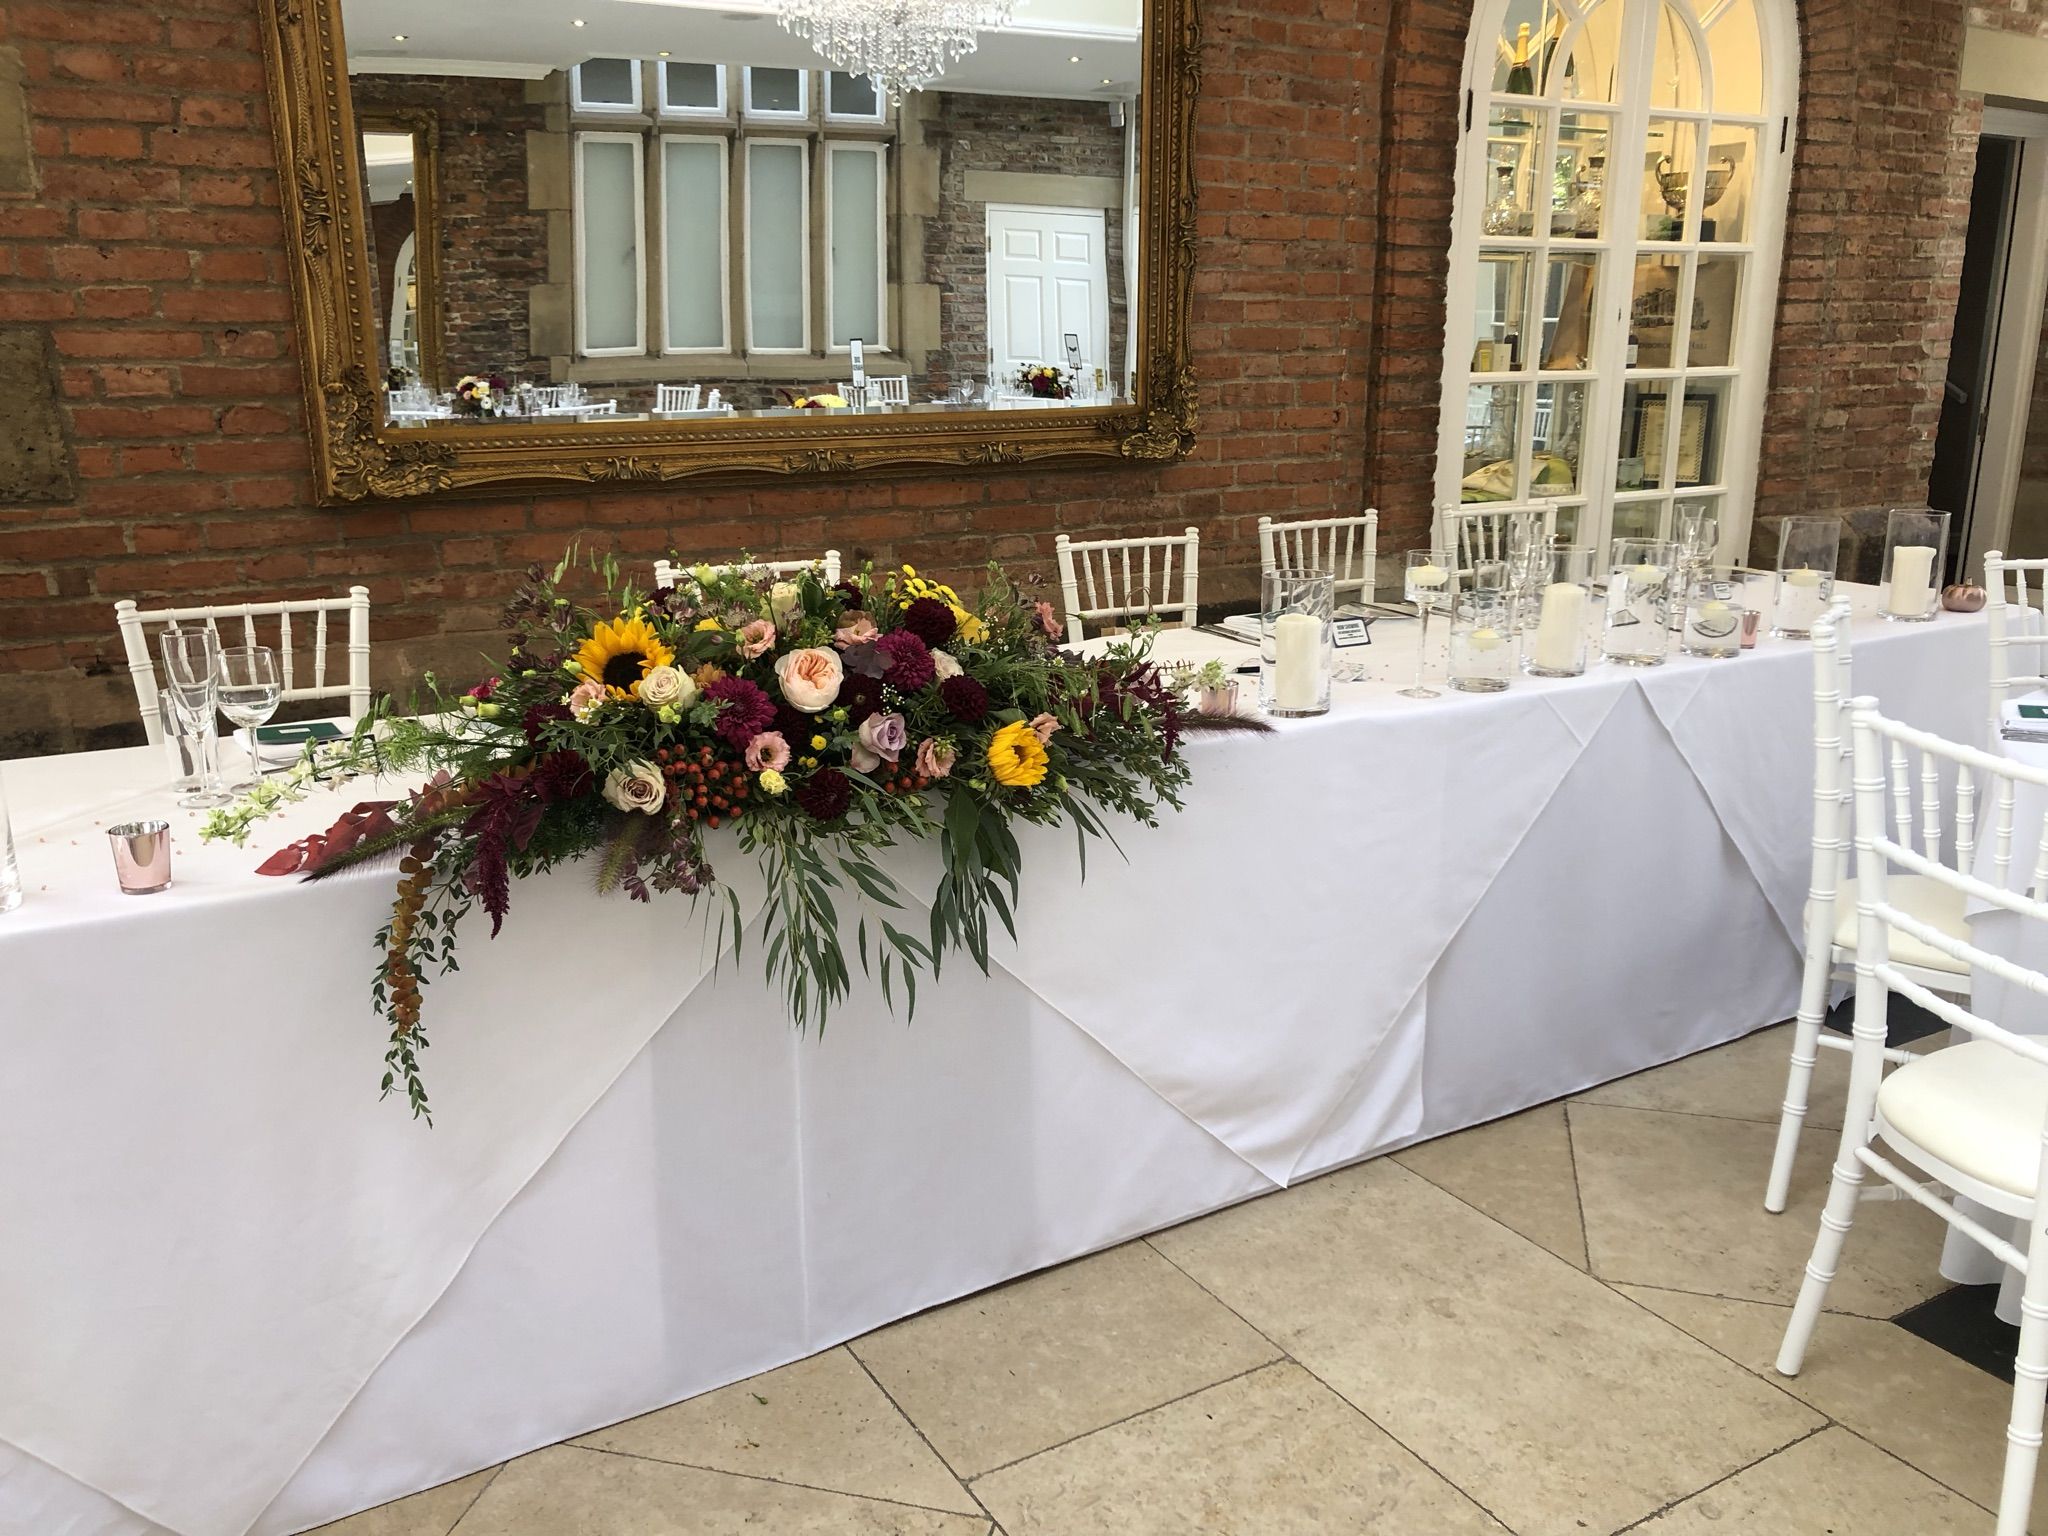 a table with flowers and candles on it.